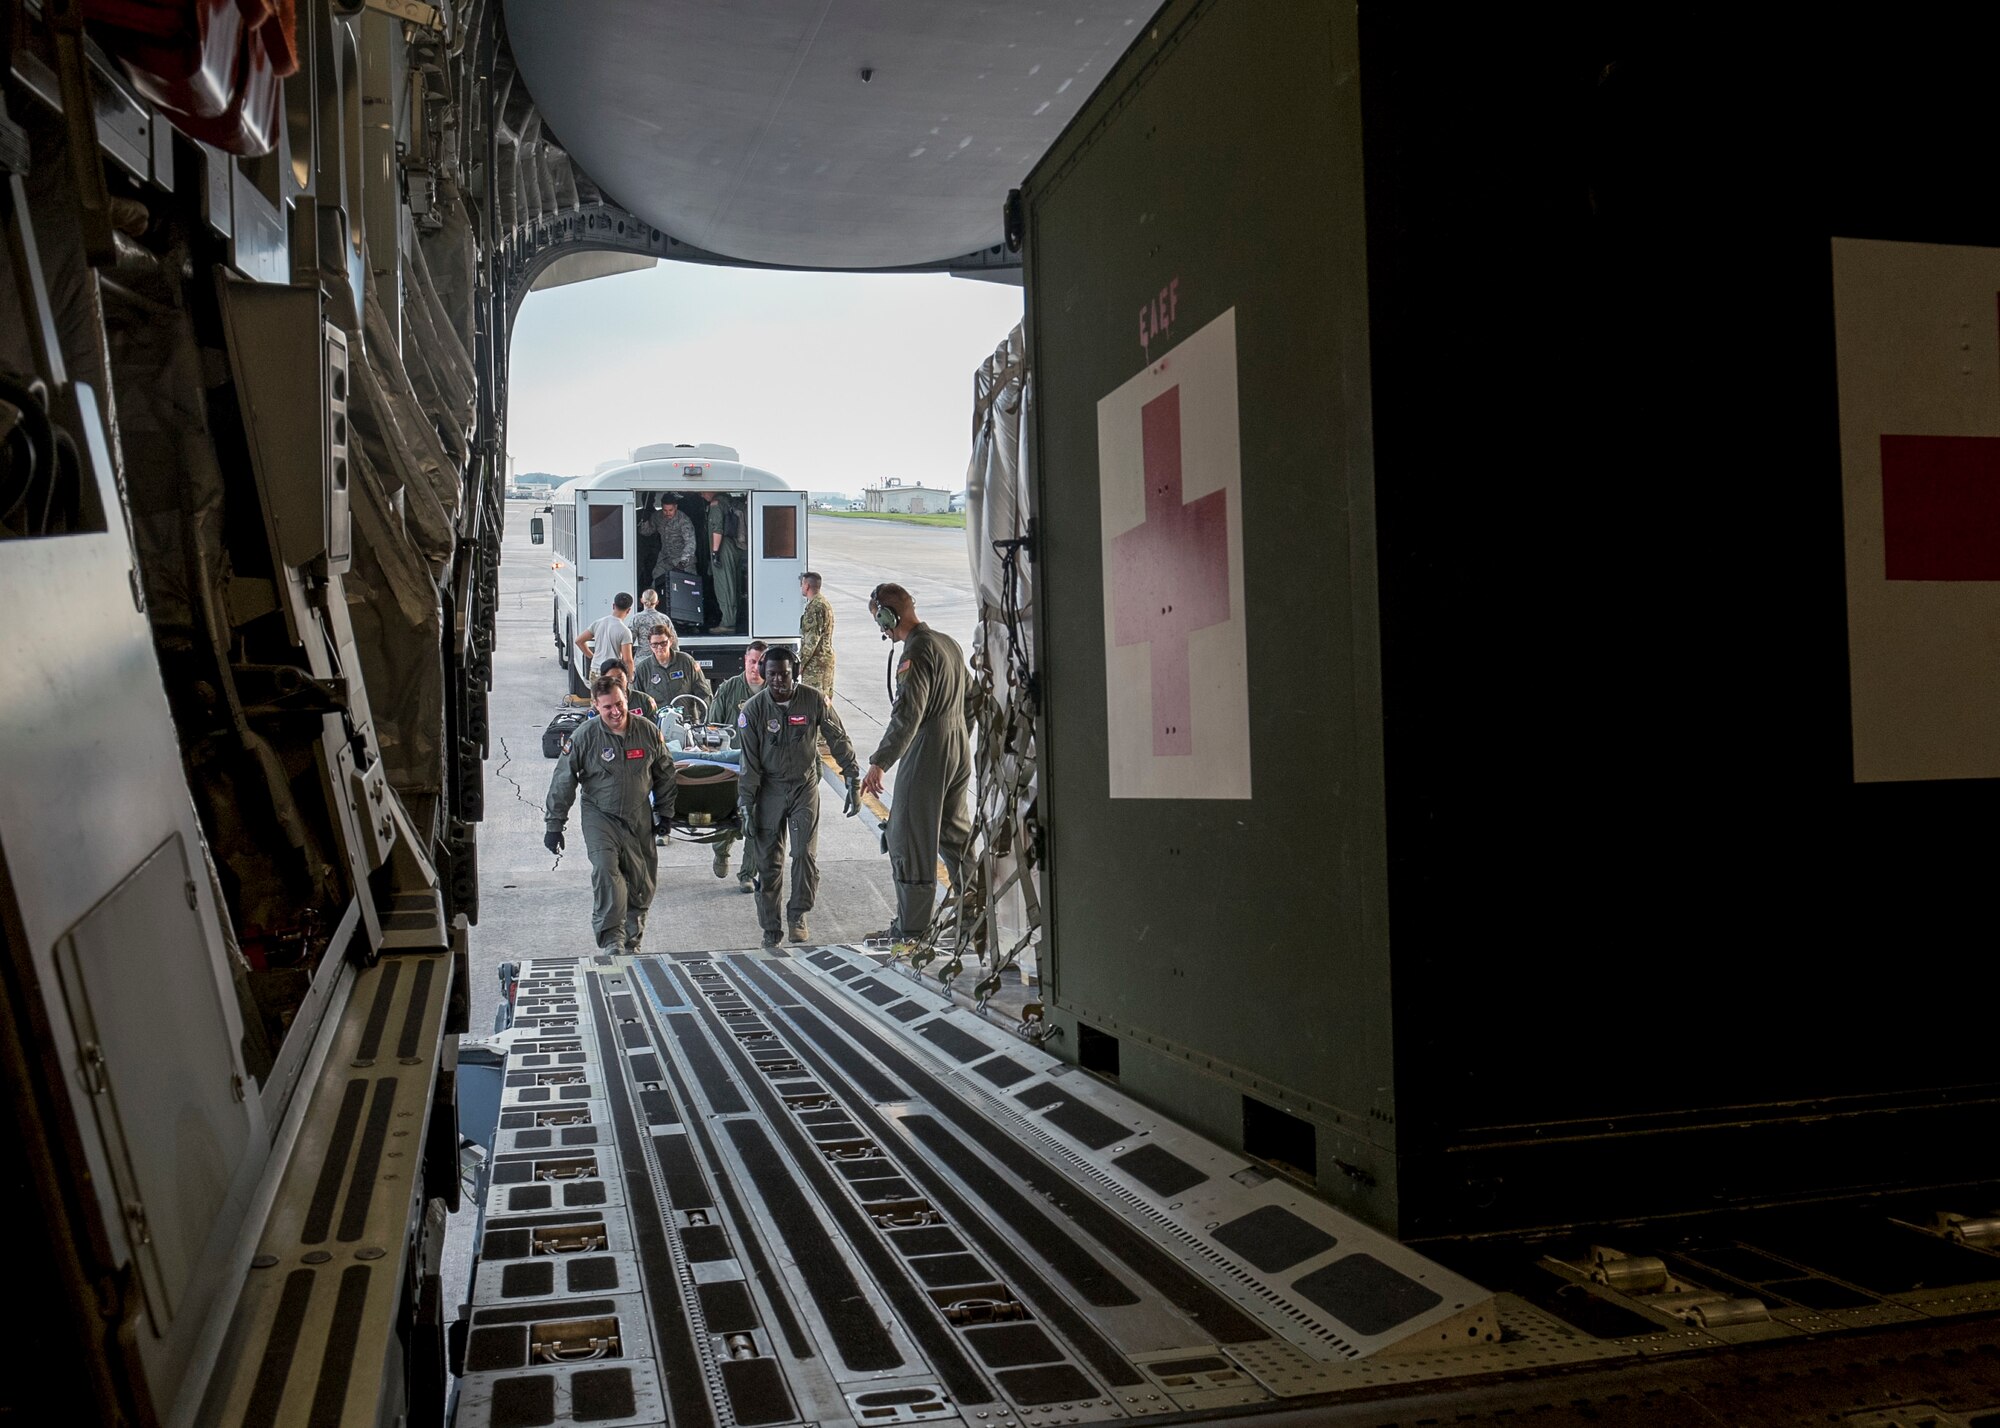 An aeromedical evacuation and critical care air transport team consisting of Airmen from the 375th AE Squadron, 18th AE Squadron, 673rd Medical Group, 36th Medical Group and 124th Medical Group, load a priority care patient onto a C-17 Globemaster III at Kadena Air Base, Japan, May 17, 2018. The C-17 from Travis AFB, Calif., was configured by an AE aircrew to provide aerial transport of patients throughout the Pacific region. (U.S. Air Force photo by Lan Kim)